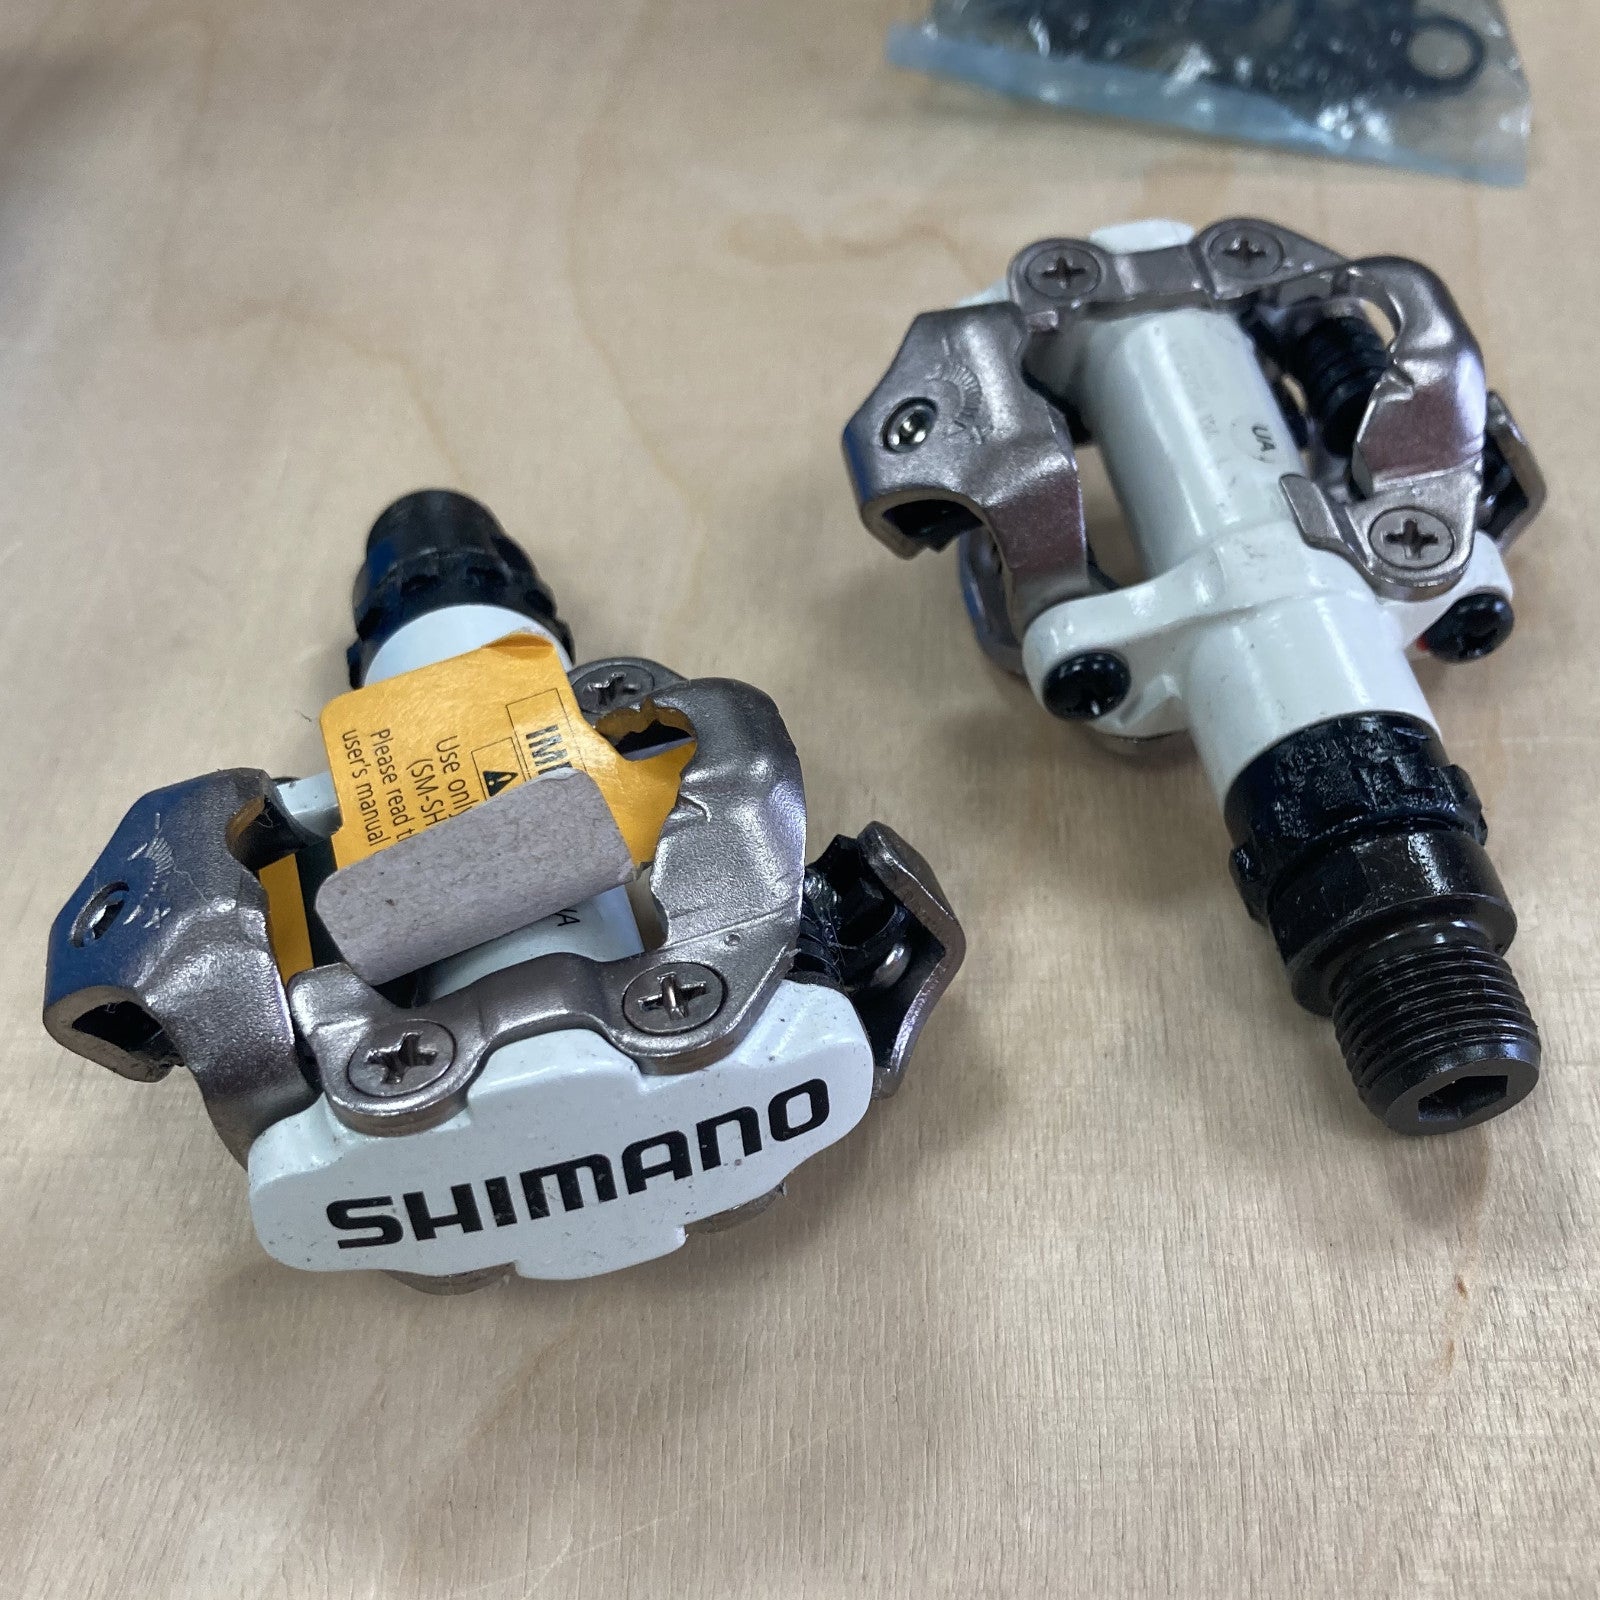 Shimano M520 White Two-Sided Shimano SPD Clipless Bike Pedals Alternate 2